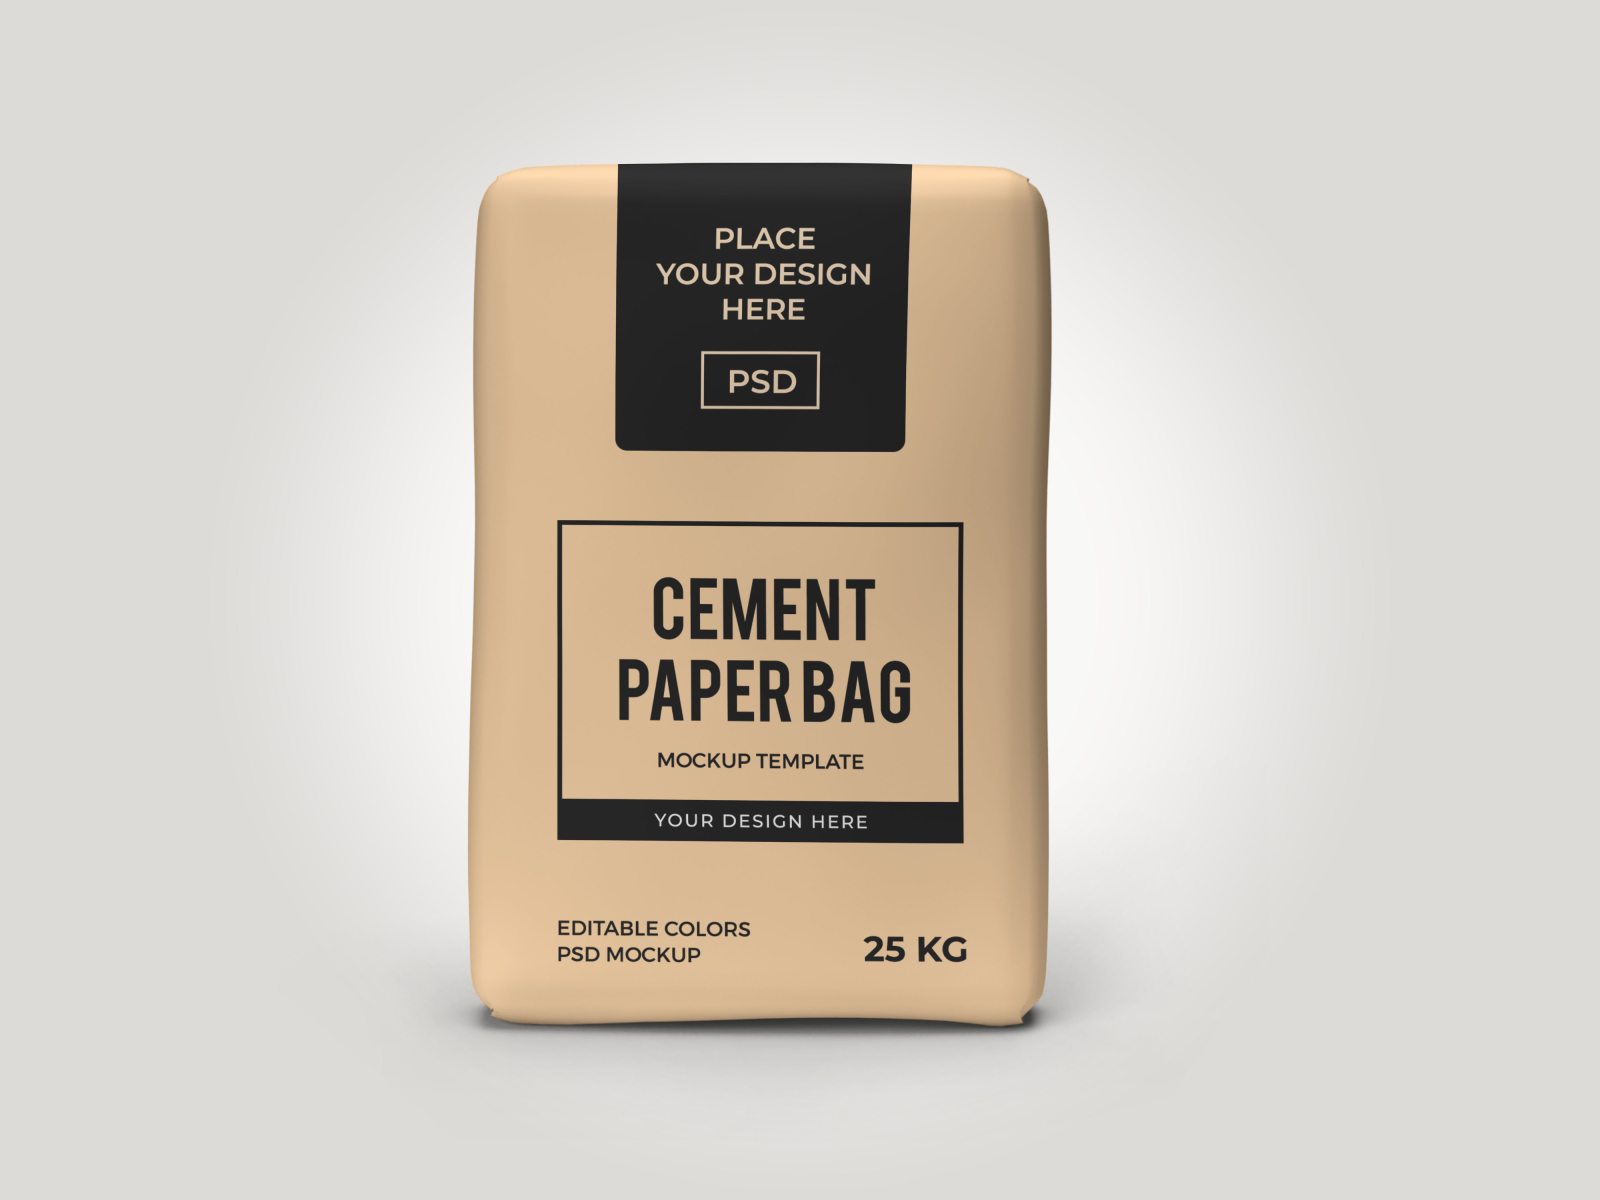 How to Manufacture Paper Bags for Cement Packaging